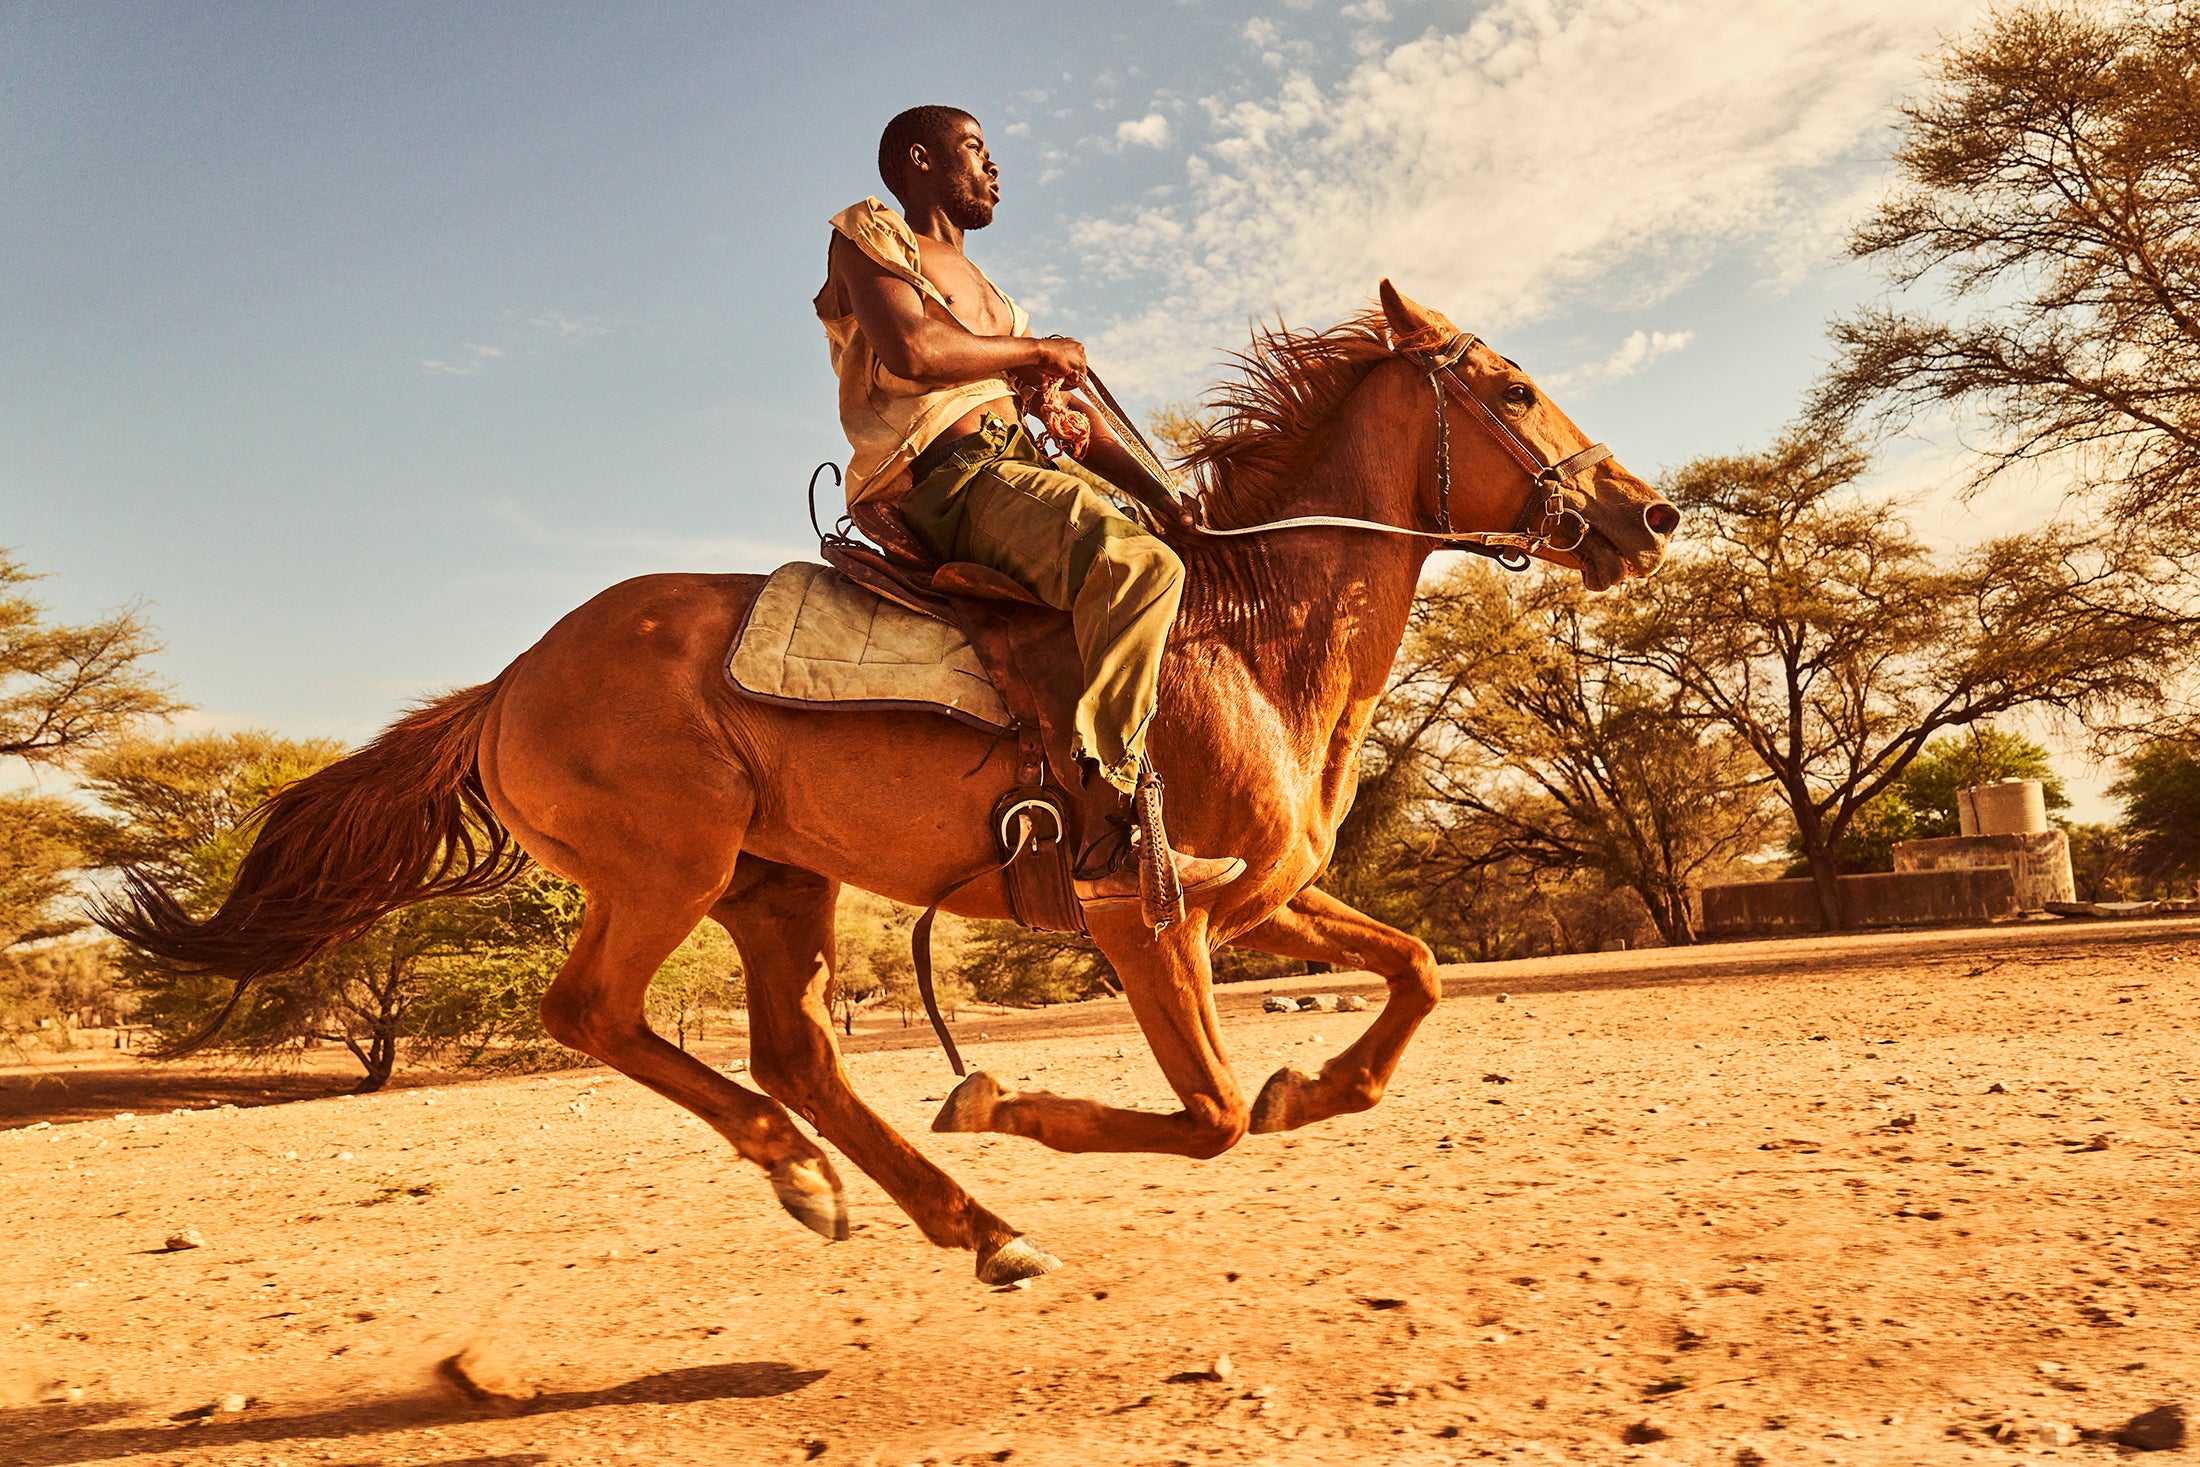 A black Namibian man rides a golden colored horse in the dried riverbed just outside Okambahe, Namibia. He looks up at the horizon in front of him. His horse is galloping with all hooves off the ground. The man is wearing a simple khaki pant and loose shirt, open and exposing his chest to the late afternoon sun. The horse is saddled with a simple leather saddle and blanket, soaked with sweat and dirt. Photo by Ben Ingham